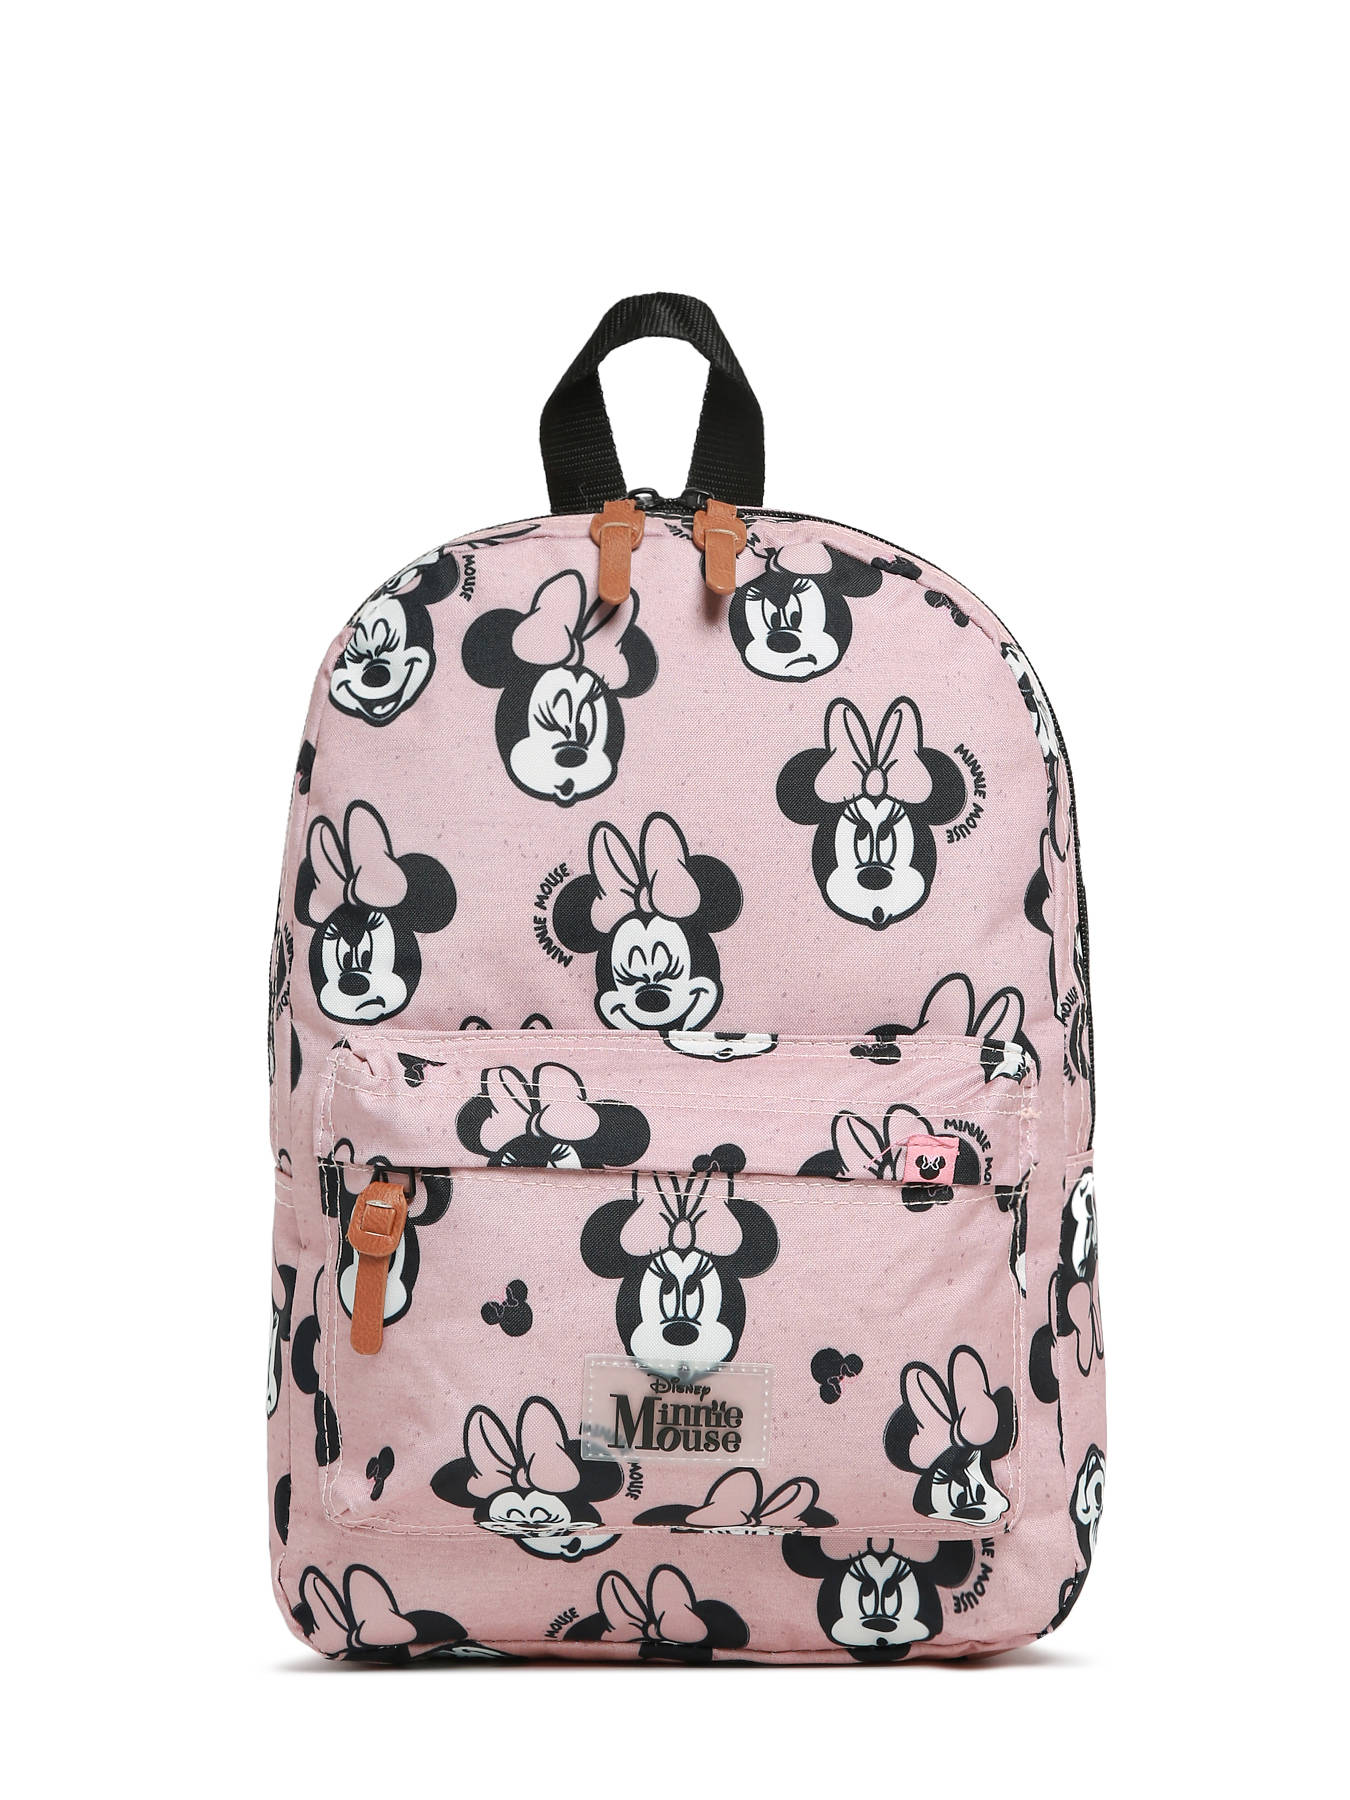 Sac à dos Mickey And Minnie Mouse Always a legend 088-2924 sur